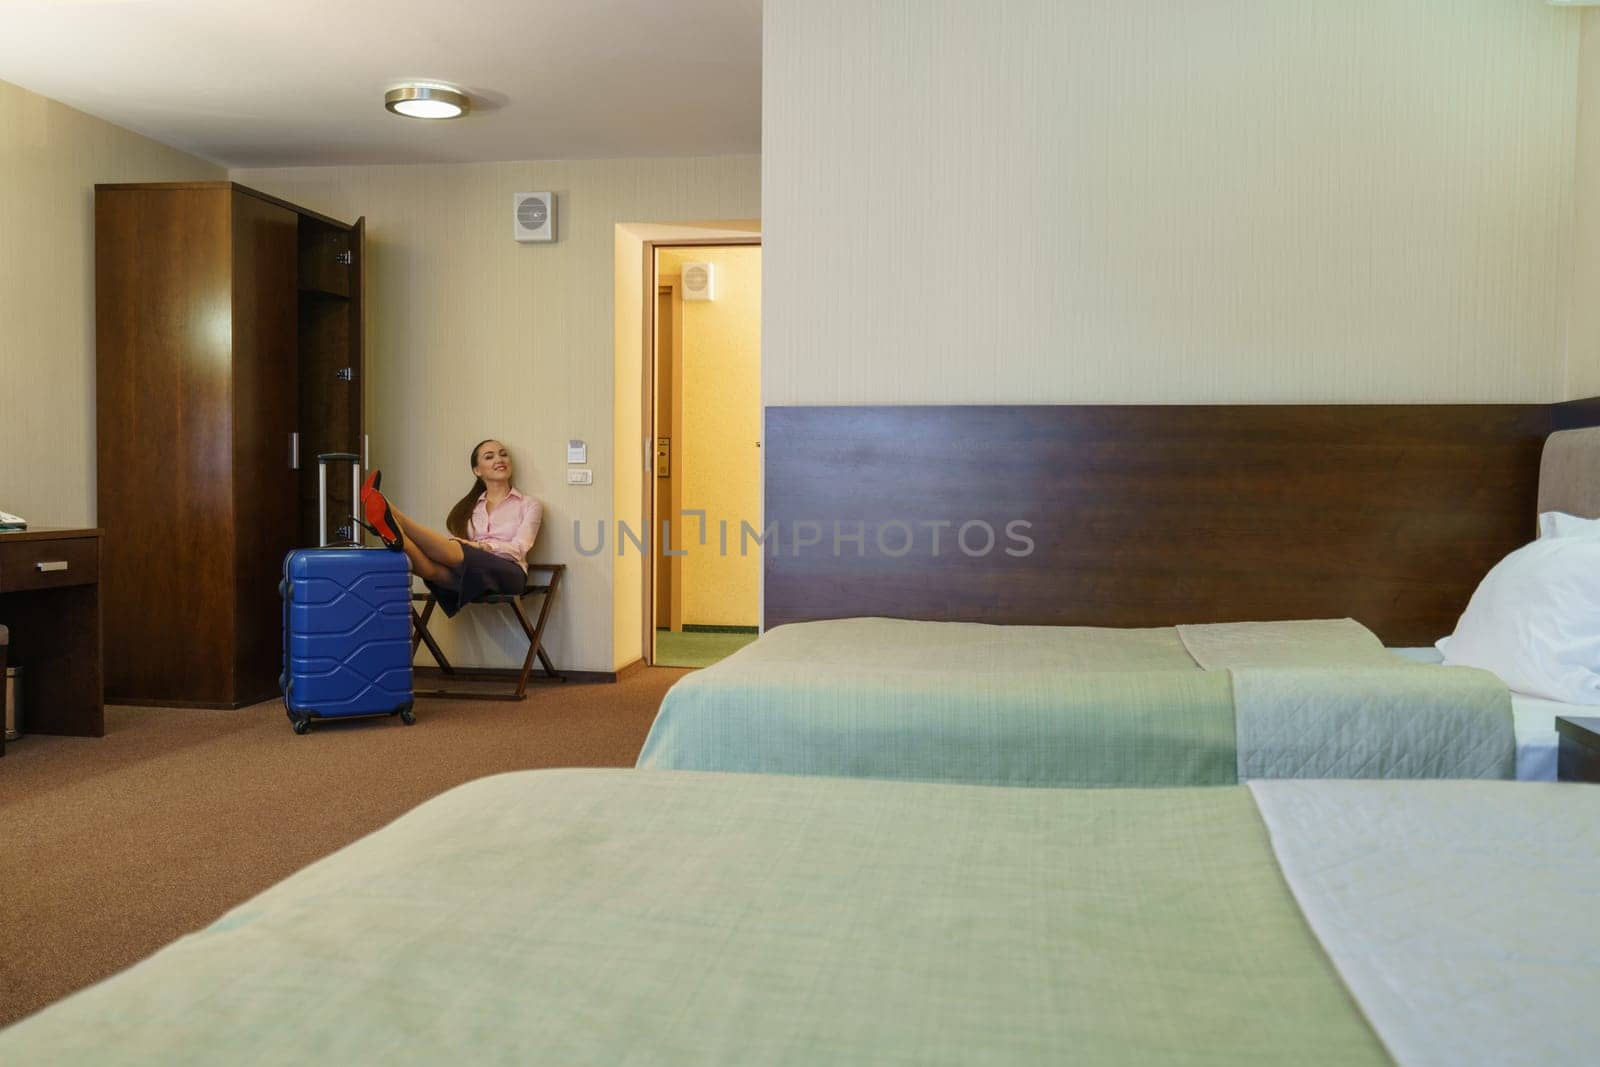 Hotel room. Woman poses while puts her feet on suitcase